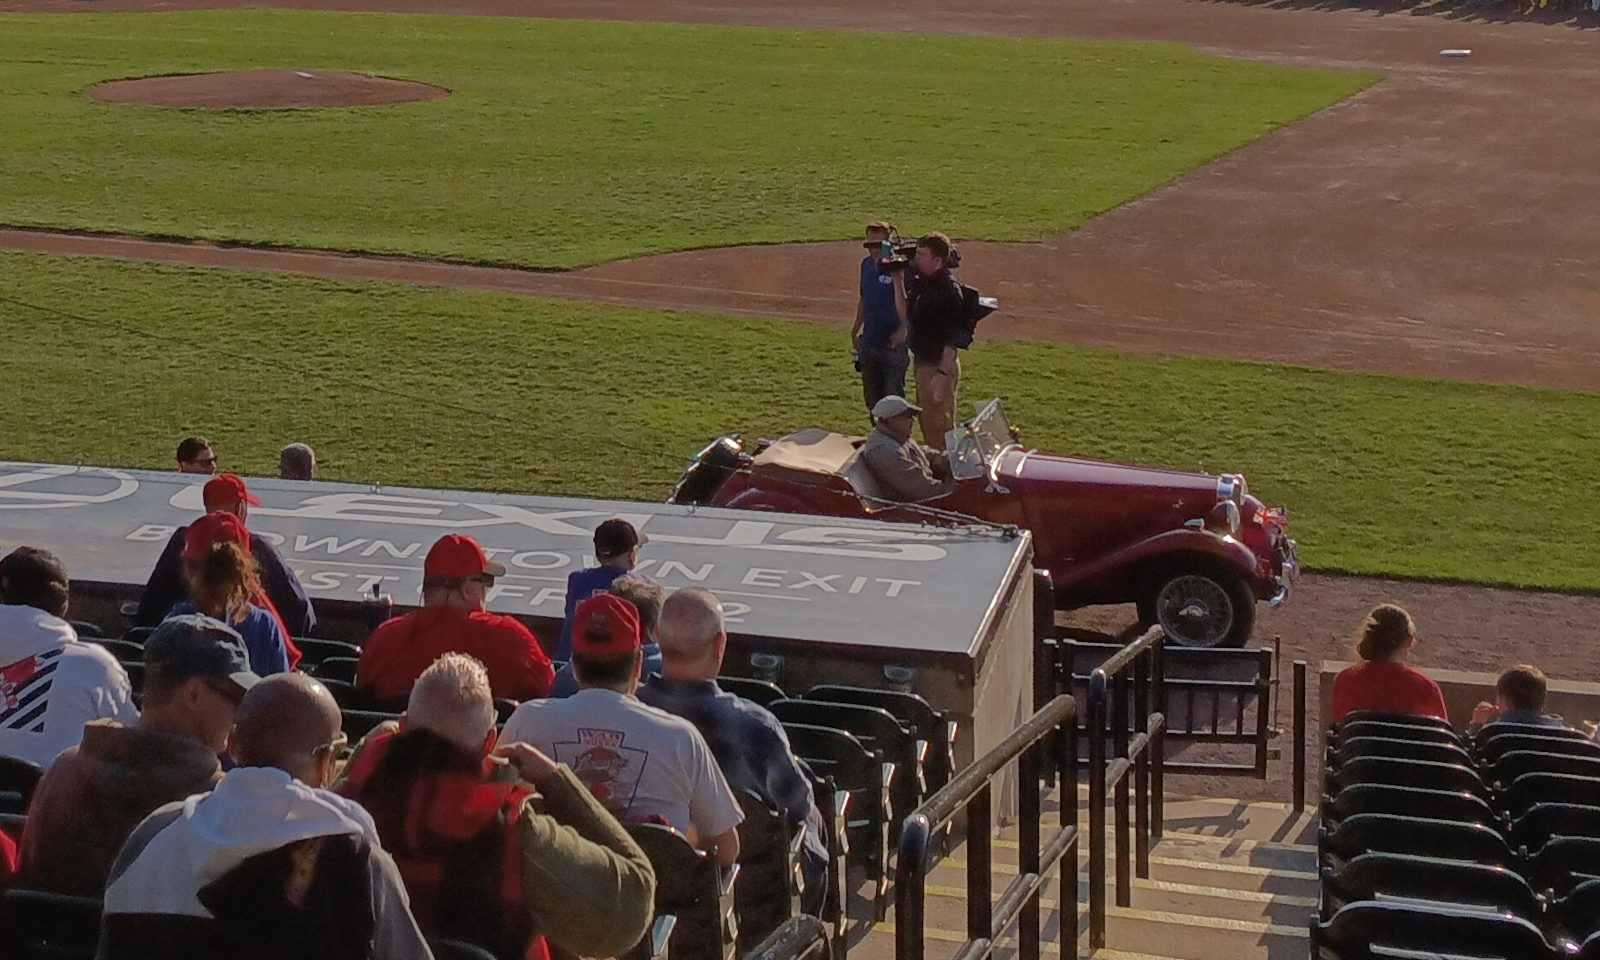 A classic car, after dropping off a player at the Barnstormers' dugout